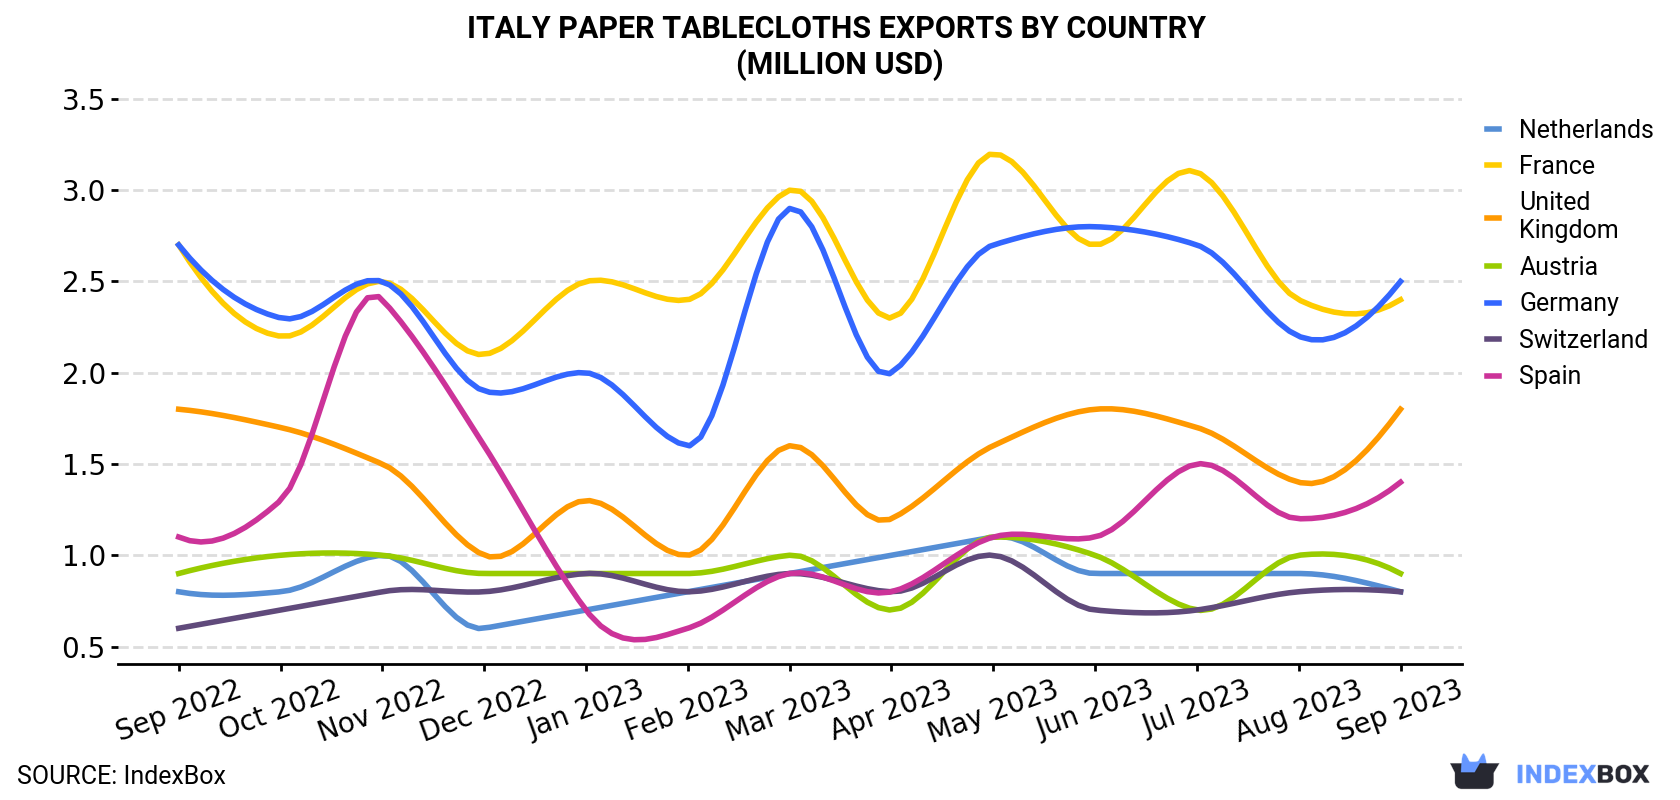 Italy Paper Tablecloths Exports By Country (Million USD)